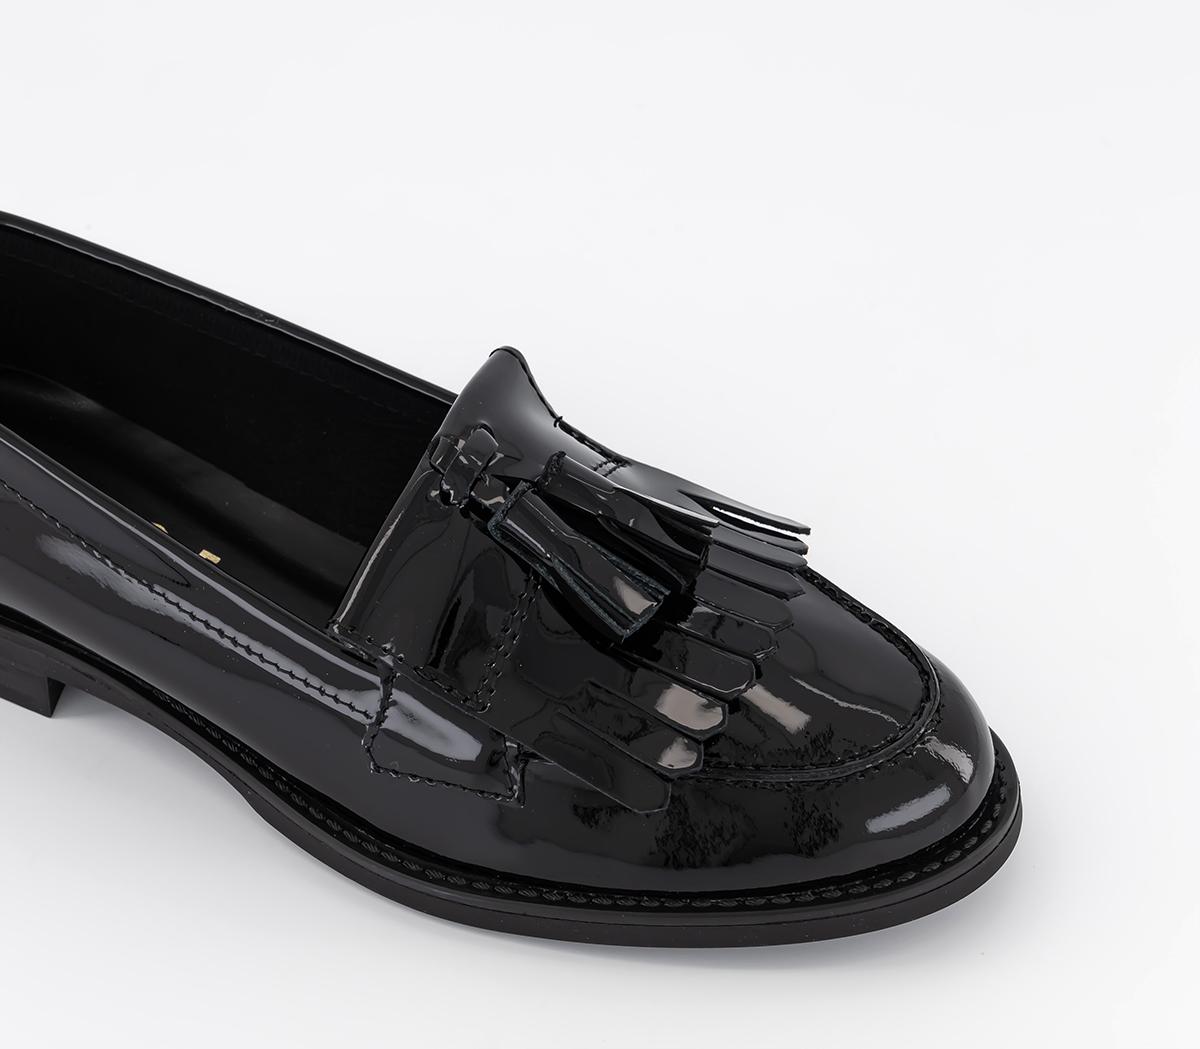 OFFICE Fitz Tassel Fringe Loafers Black Patent Leather - Flat Shoes for ...